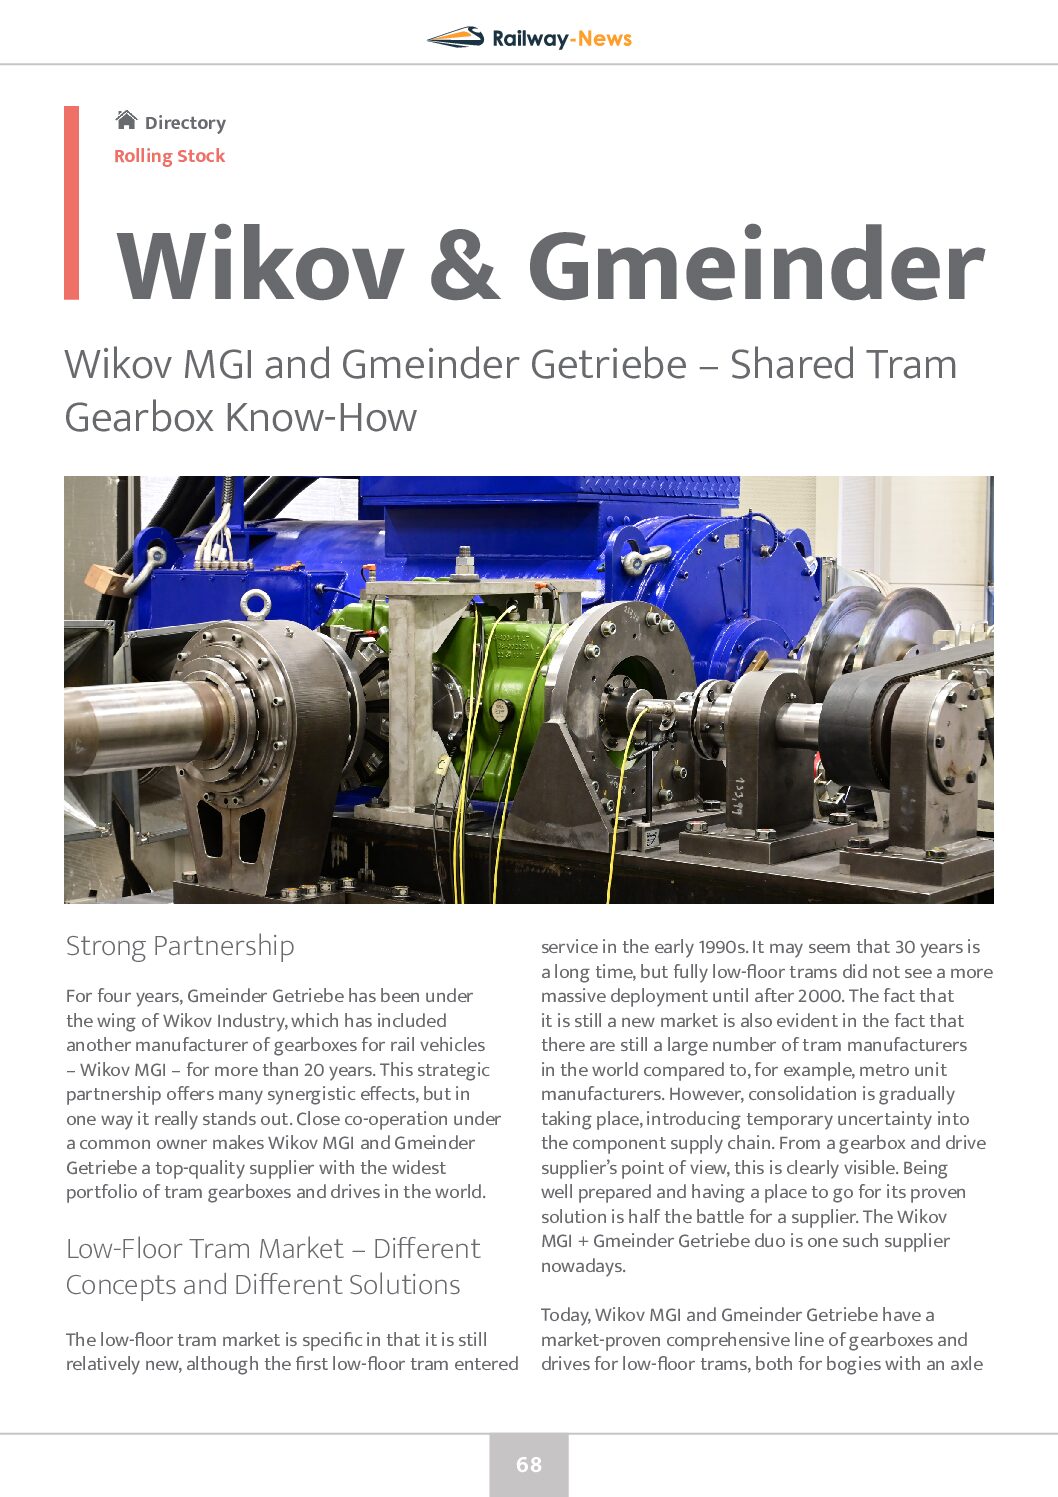 Wikov MGI & Gmeinder Getriebe Shared Tram Gearbox Know-How